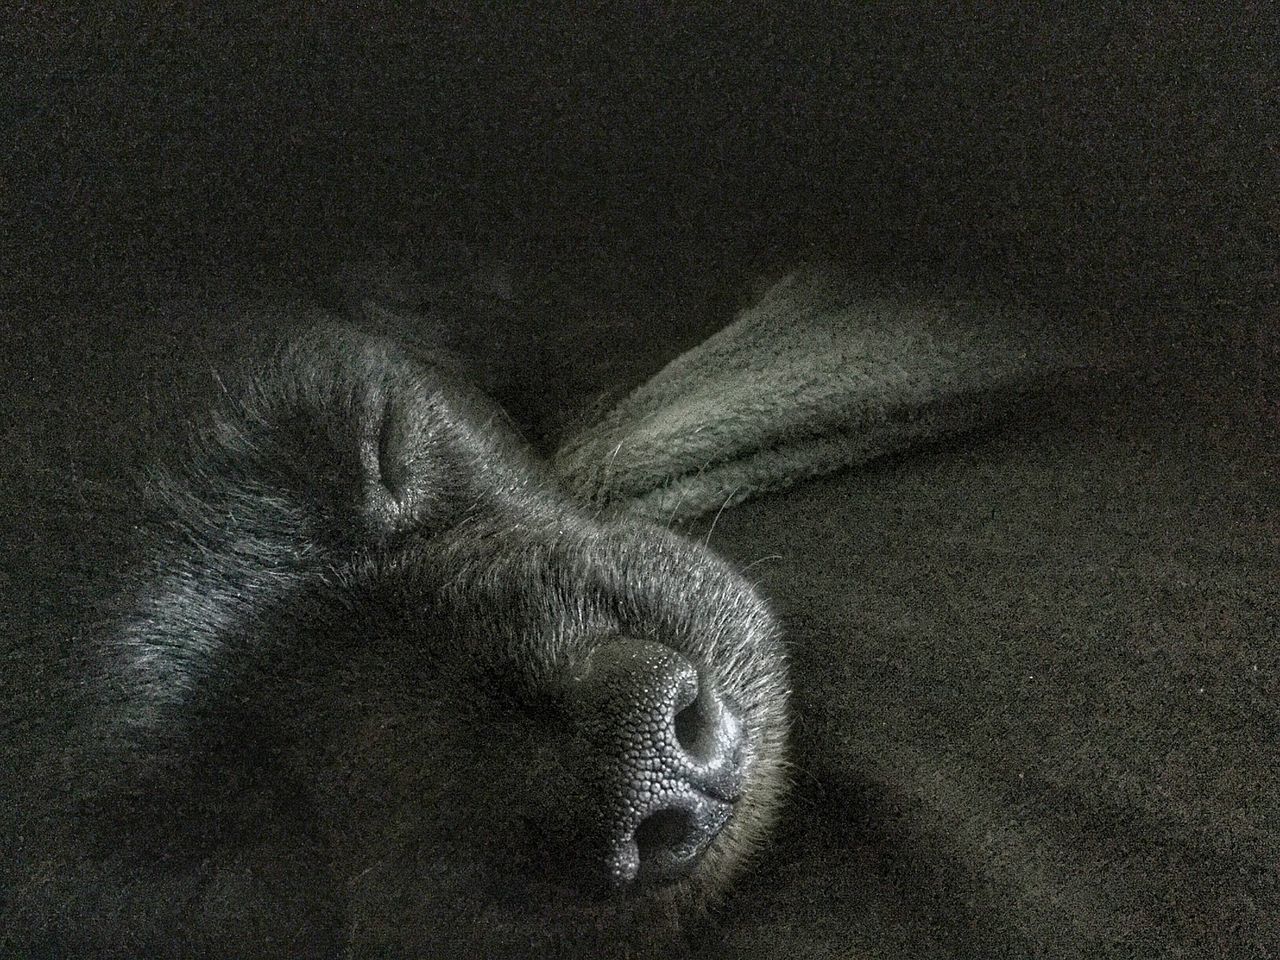 CLOSE-UP OF A DOG RESTING